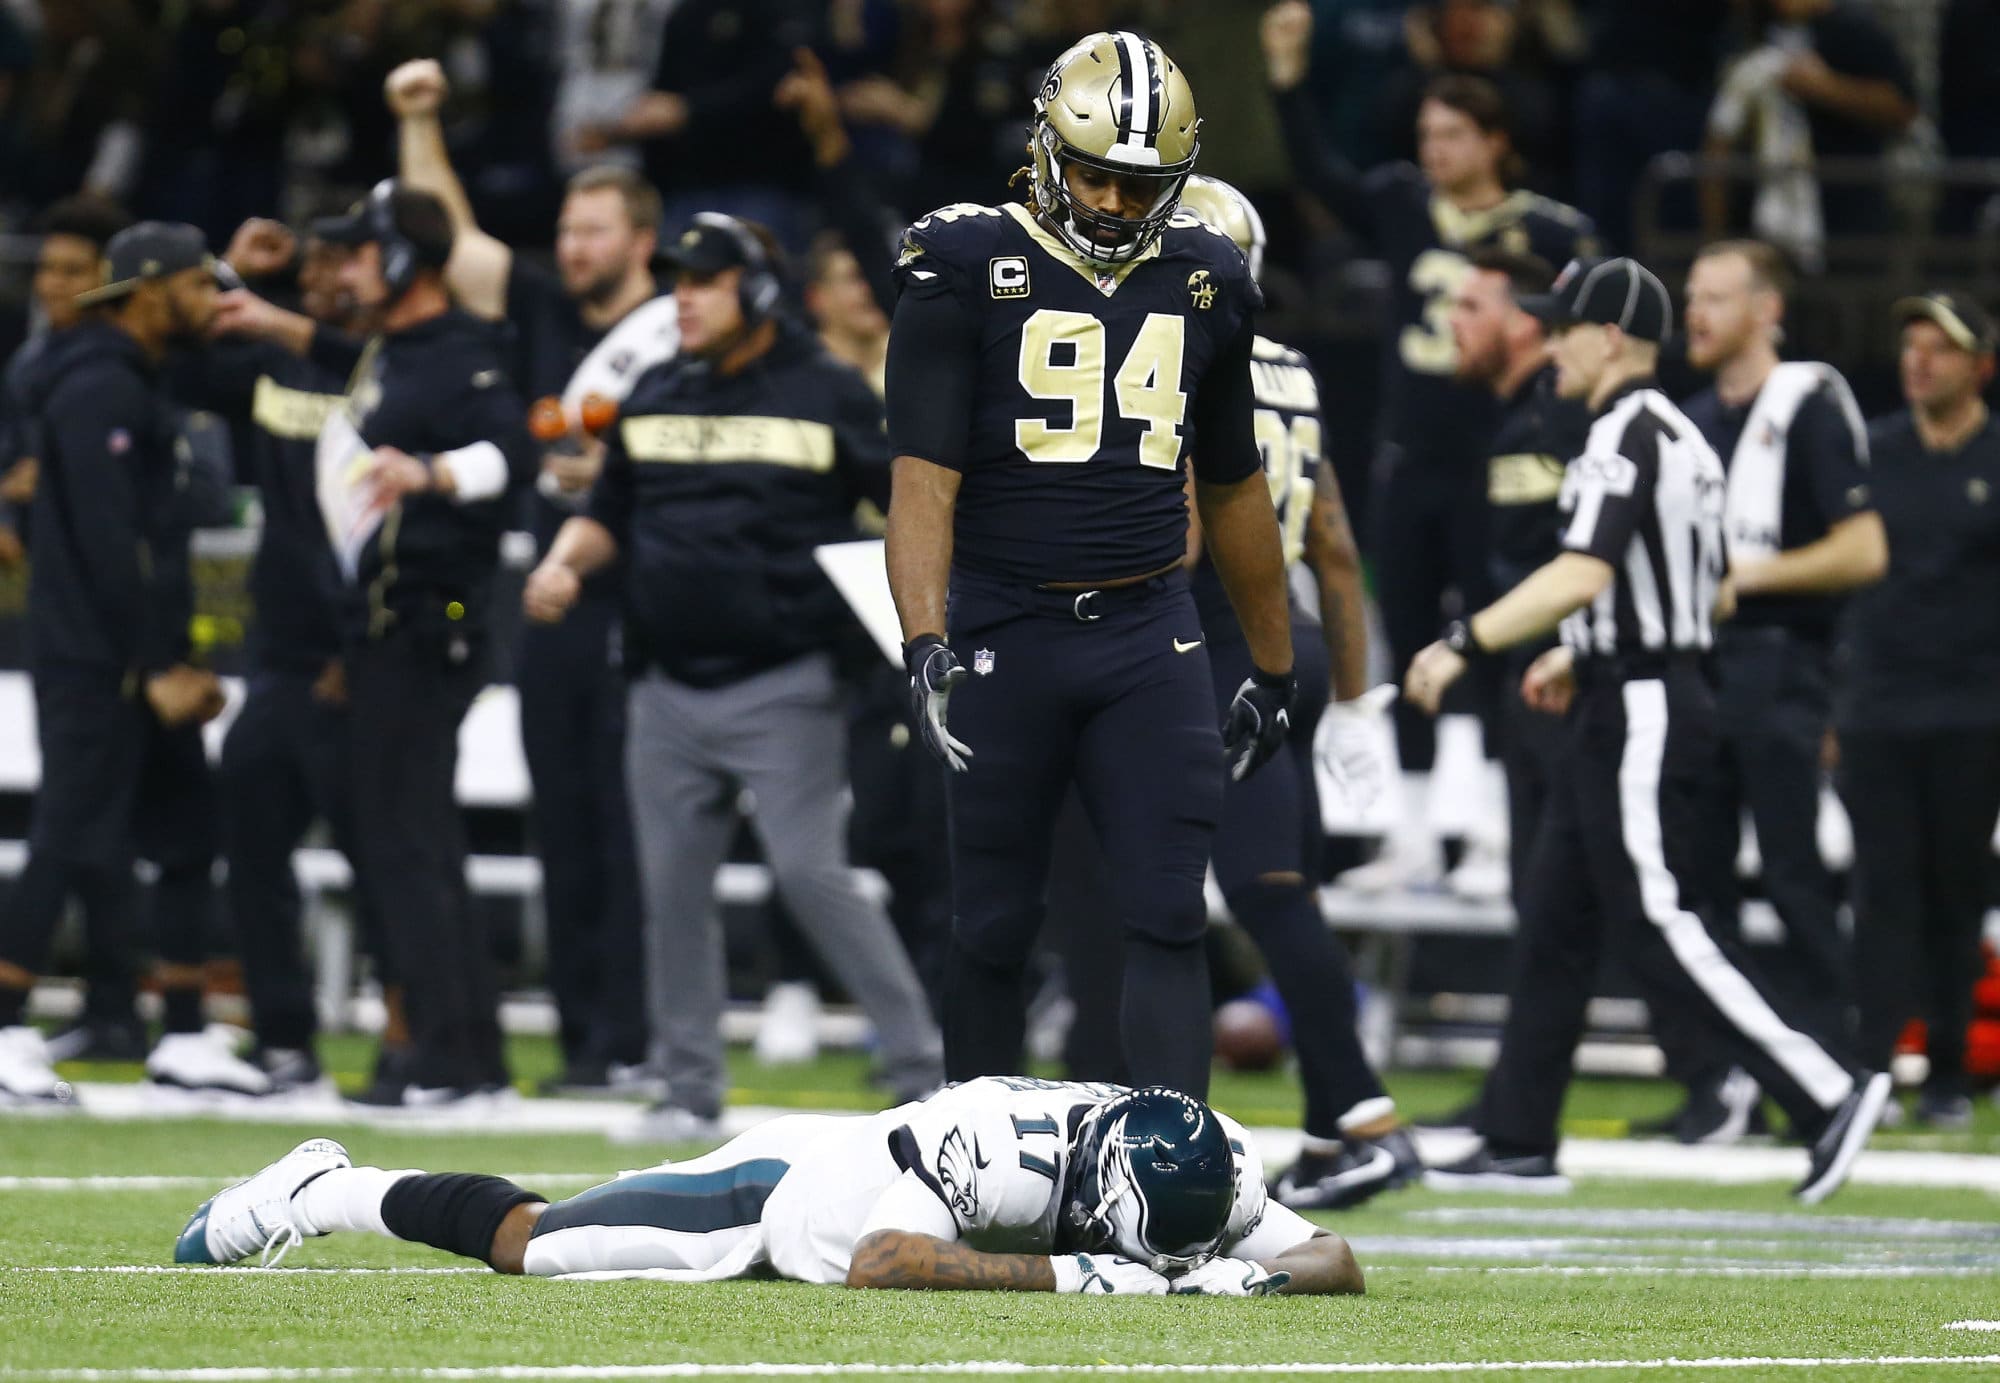 Philadelphia Eagles wide receiver Alshon Jeffery (17) lies on the turf in front of New Orleans Saints defensive end Cameron Jordan (94) after the Saints intercepted a pass in the second half of an NFL divisional playoff football game in New Orleans, Sunday, Jan. 13, 2019. The Saints won 20-14. (AP Photo/Butch Dill)